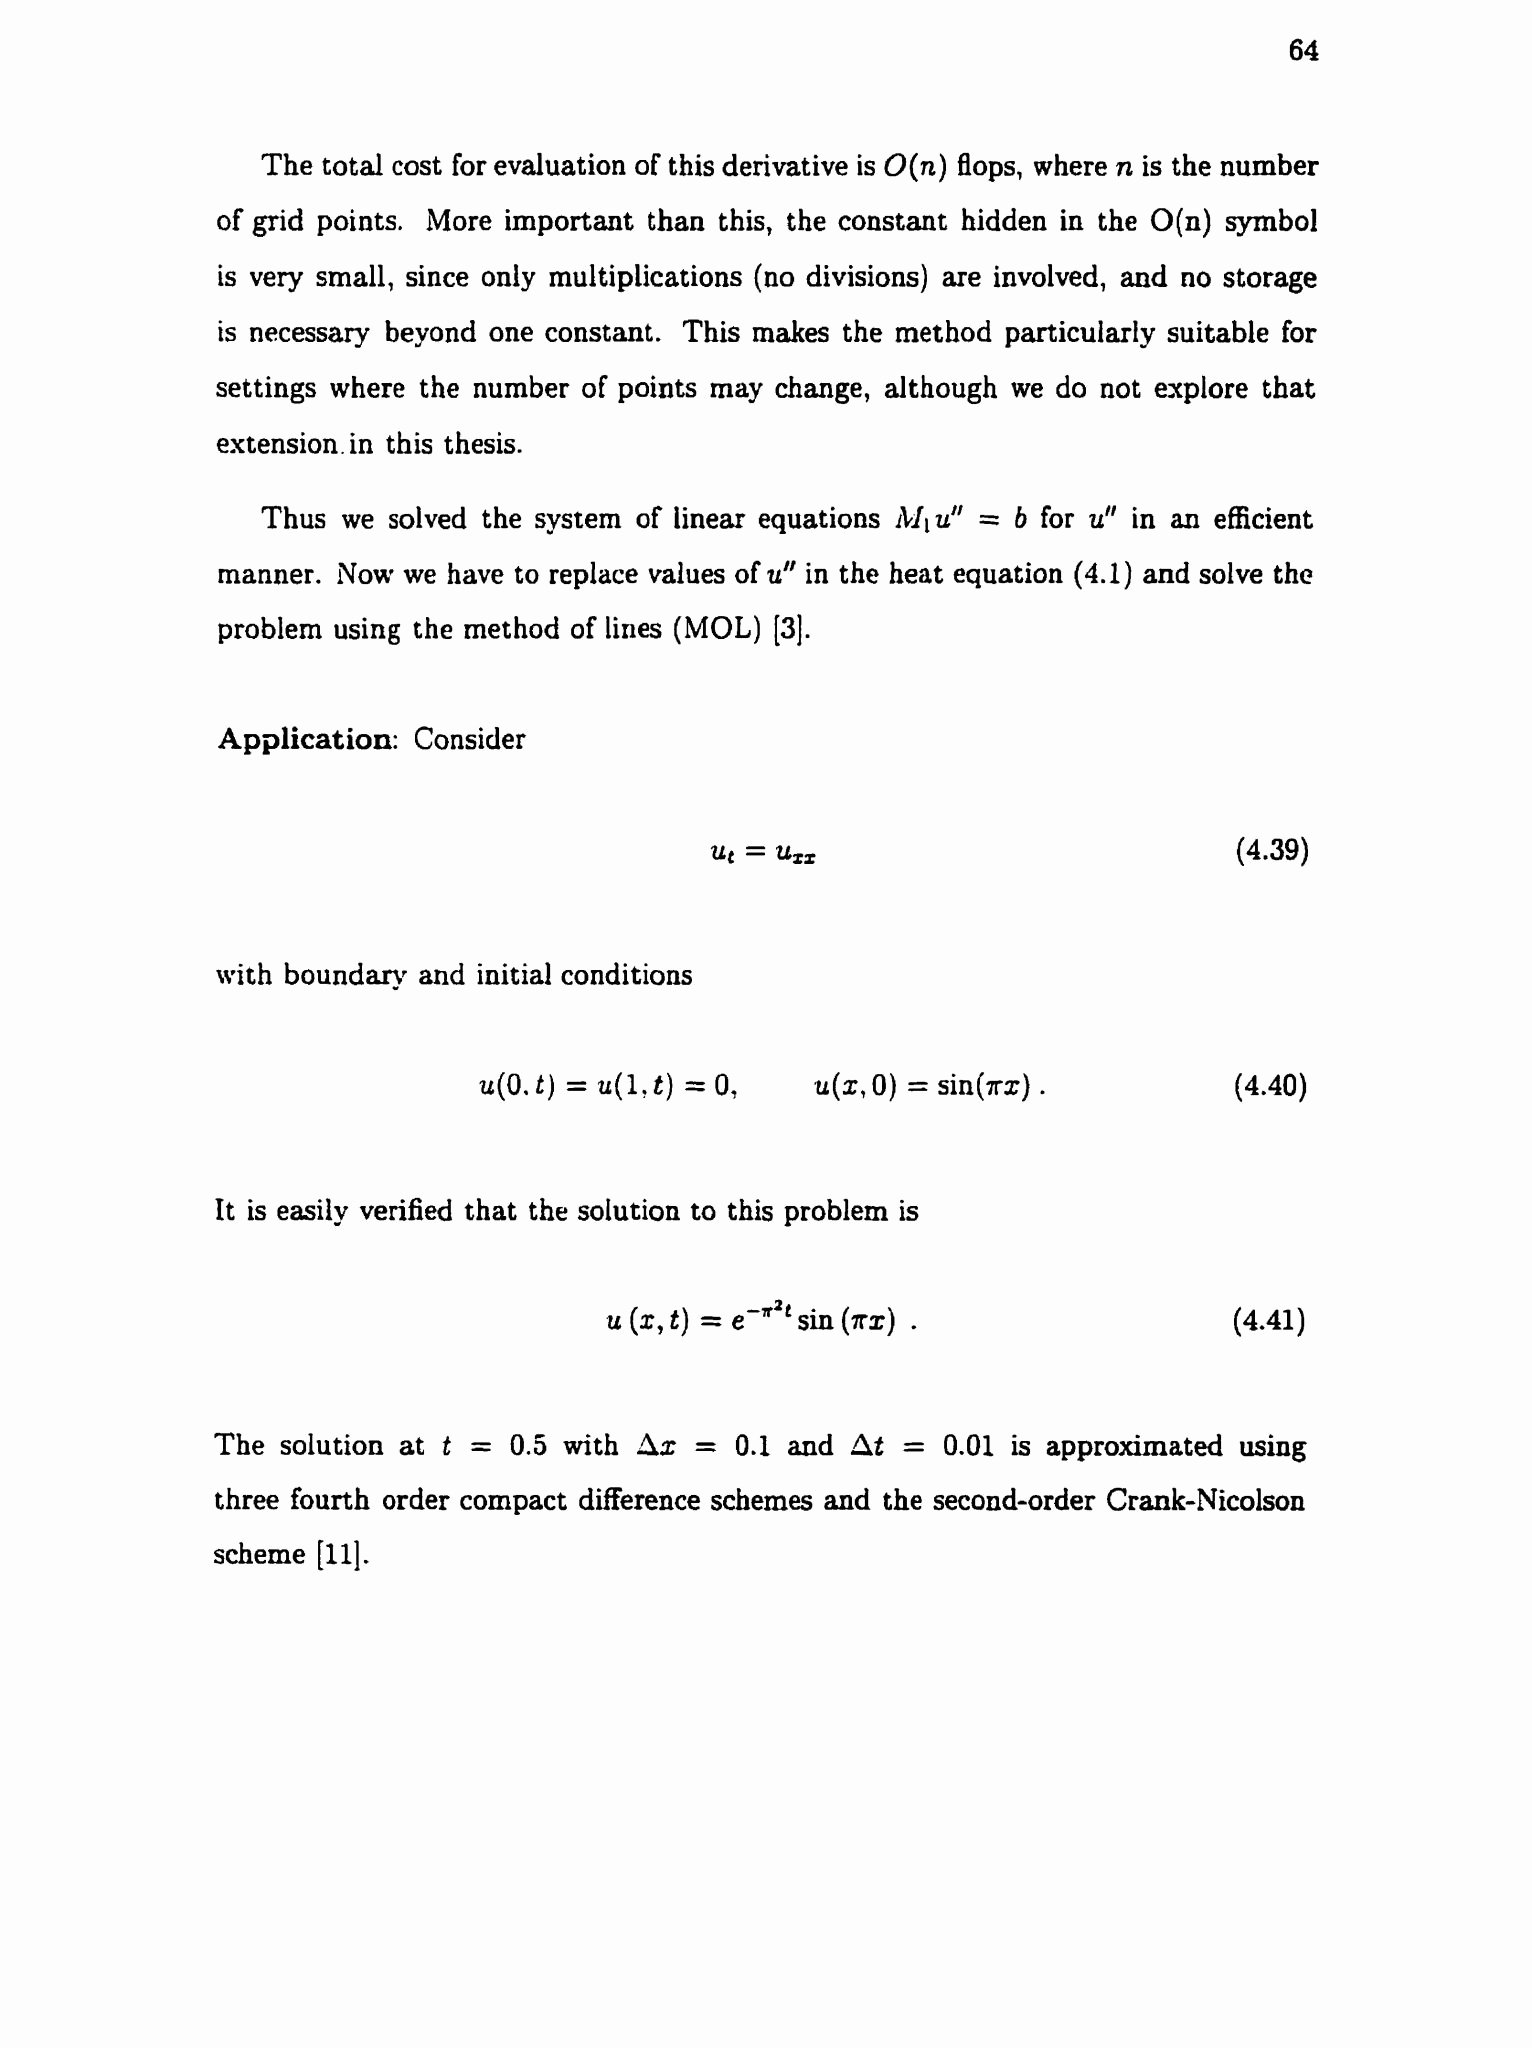 Linear Functions Word Problems Worksheet Elegant solving Linear Equations Word Problems Worksheet Pdf